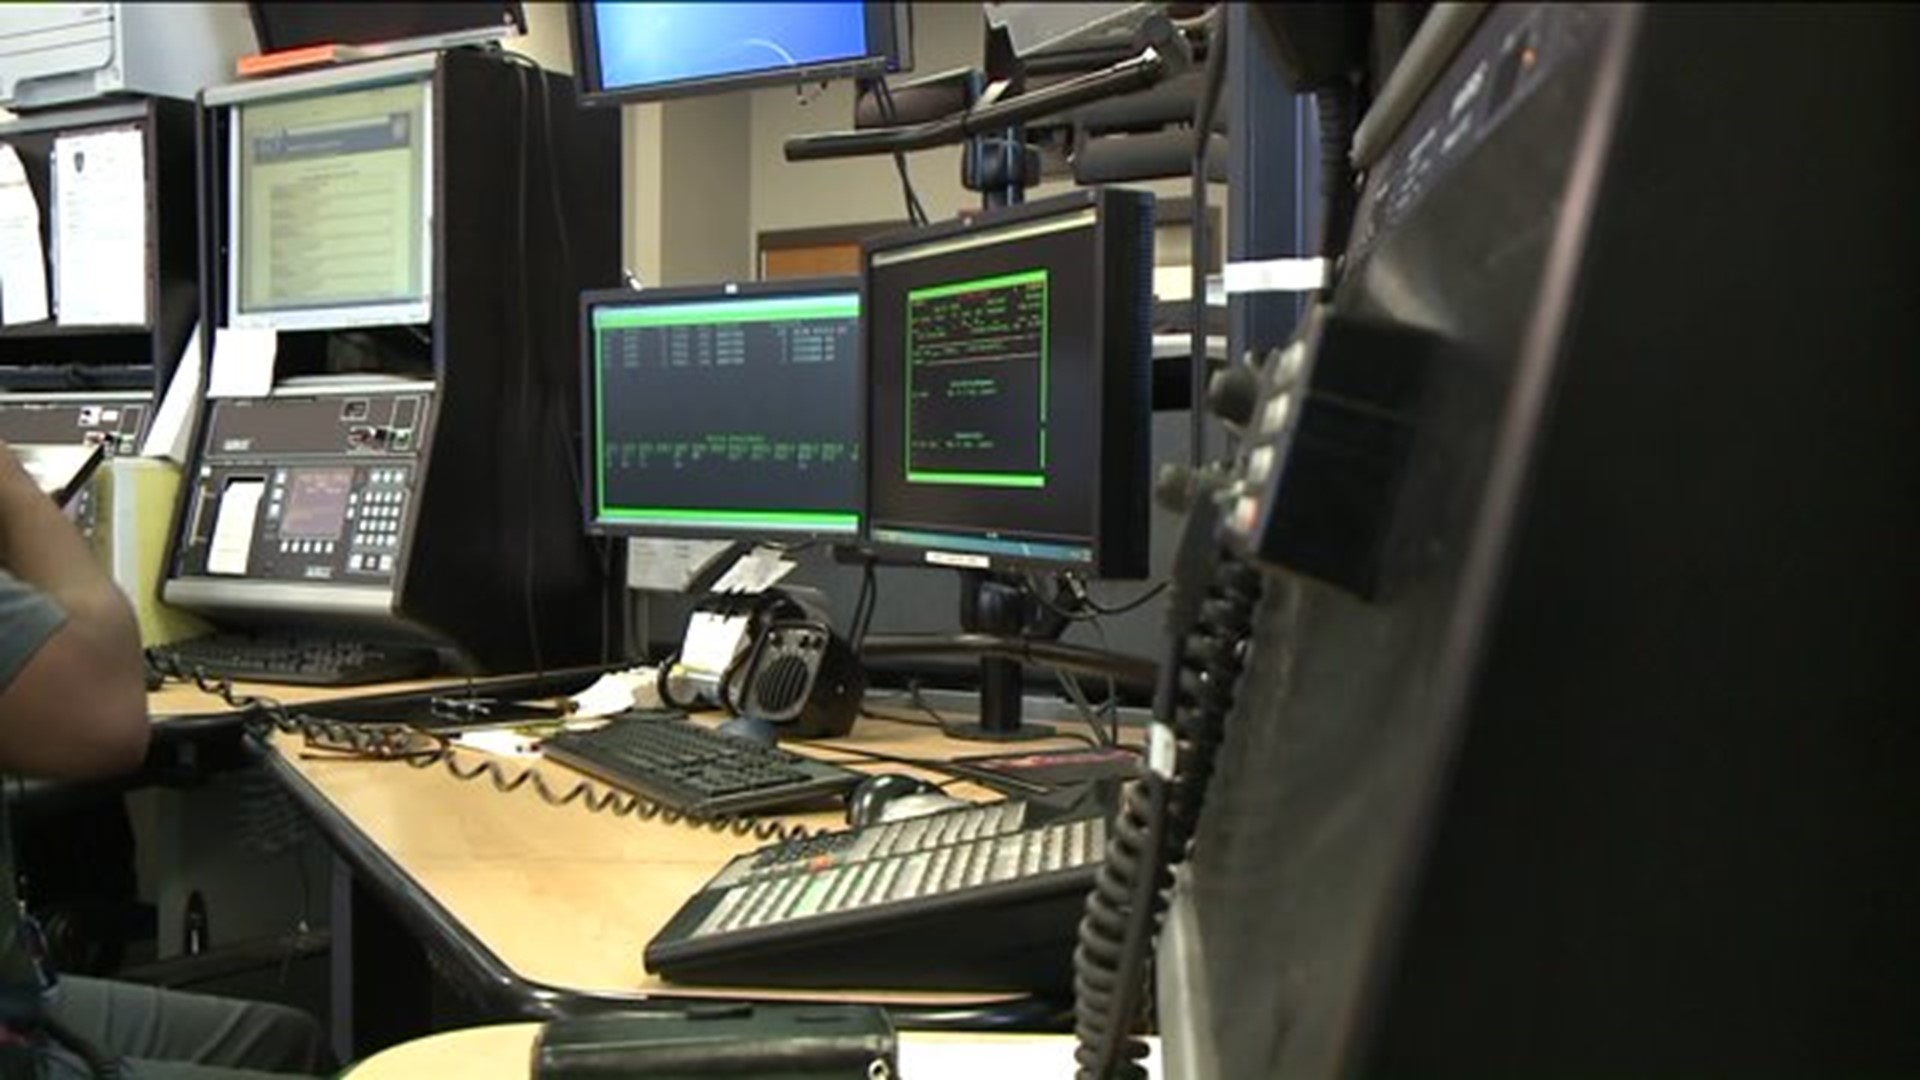 Bill proposed to use location services for 911 calls